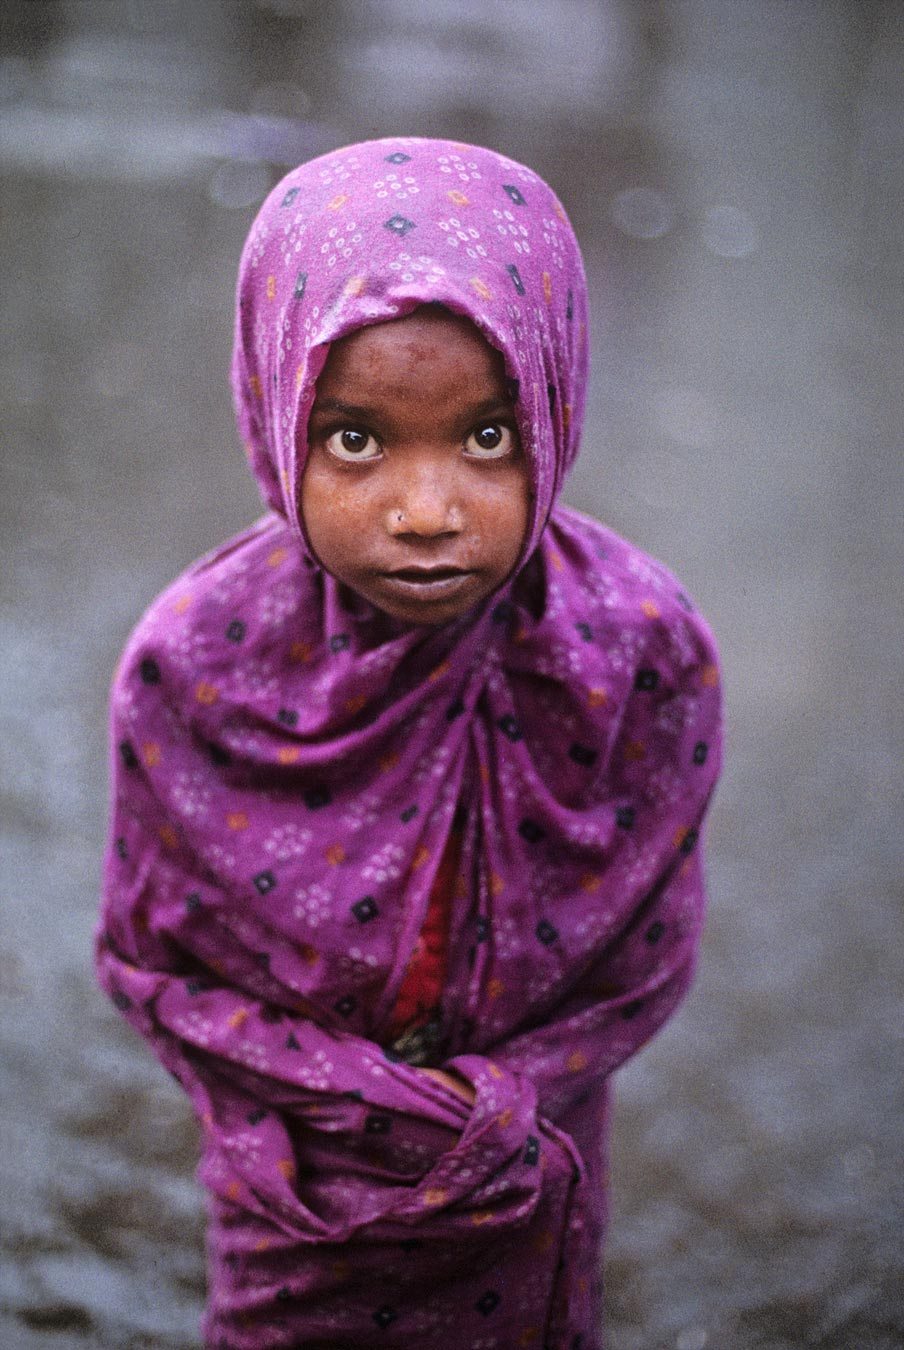 Steve-McCurry-A-Life-in-Pictures